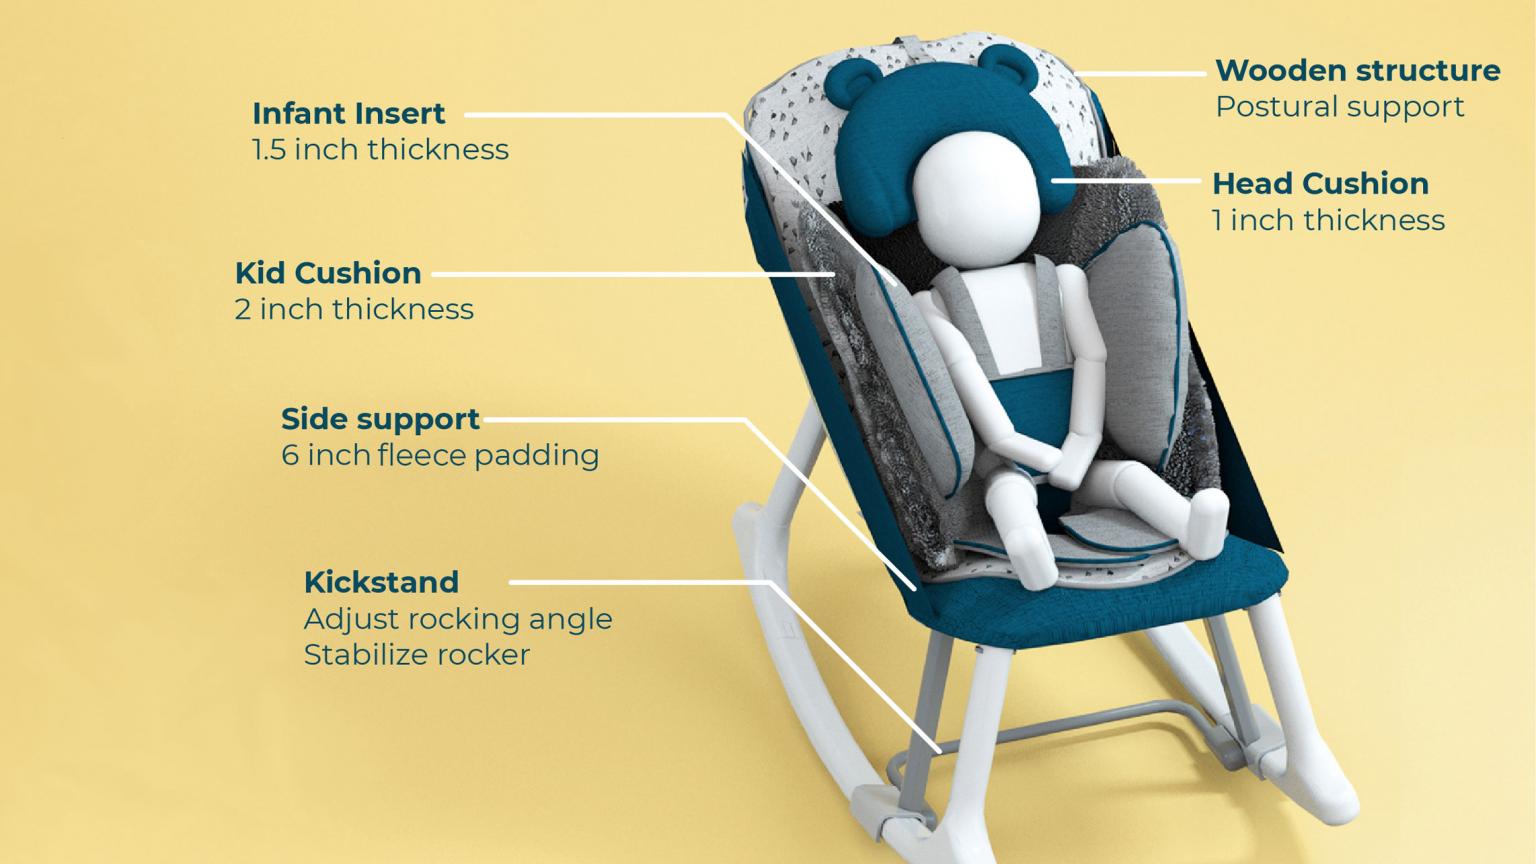 A mock-up render of a chair design for infants with callouts detailing features of design.